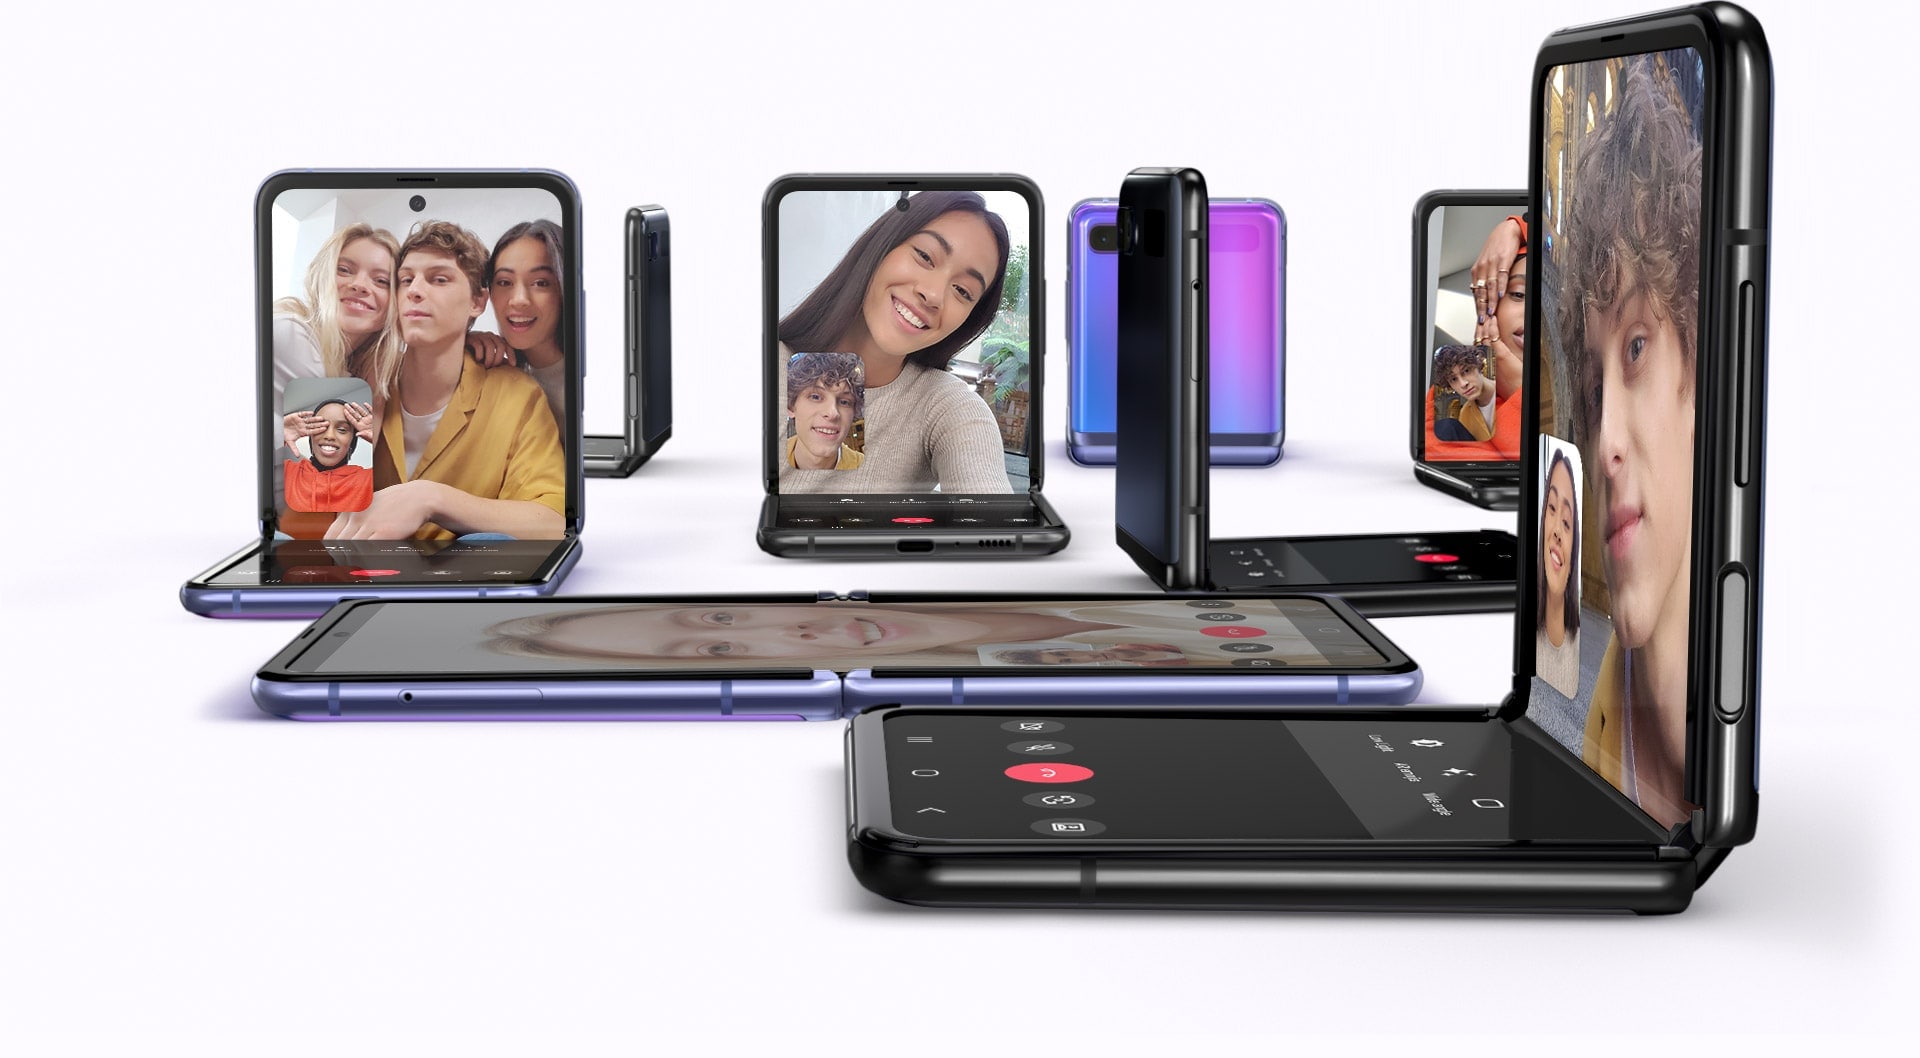 Multiple Galaxy Z Flip phones, some folded at right angles and others unfolded. All have the Google Duo interface onscreen for high-definition video chatting across different OS